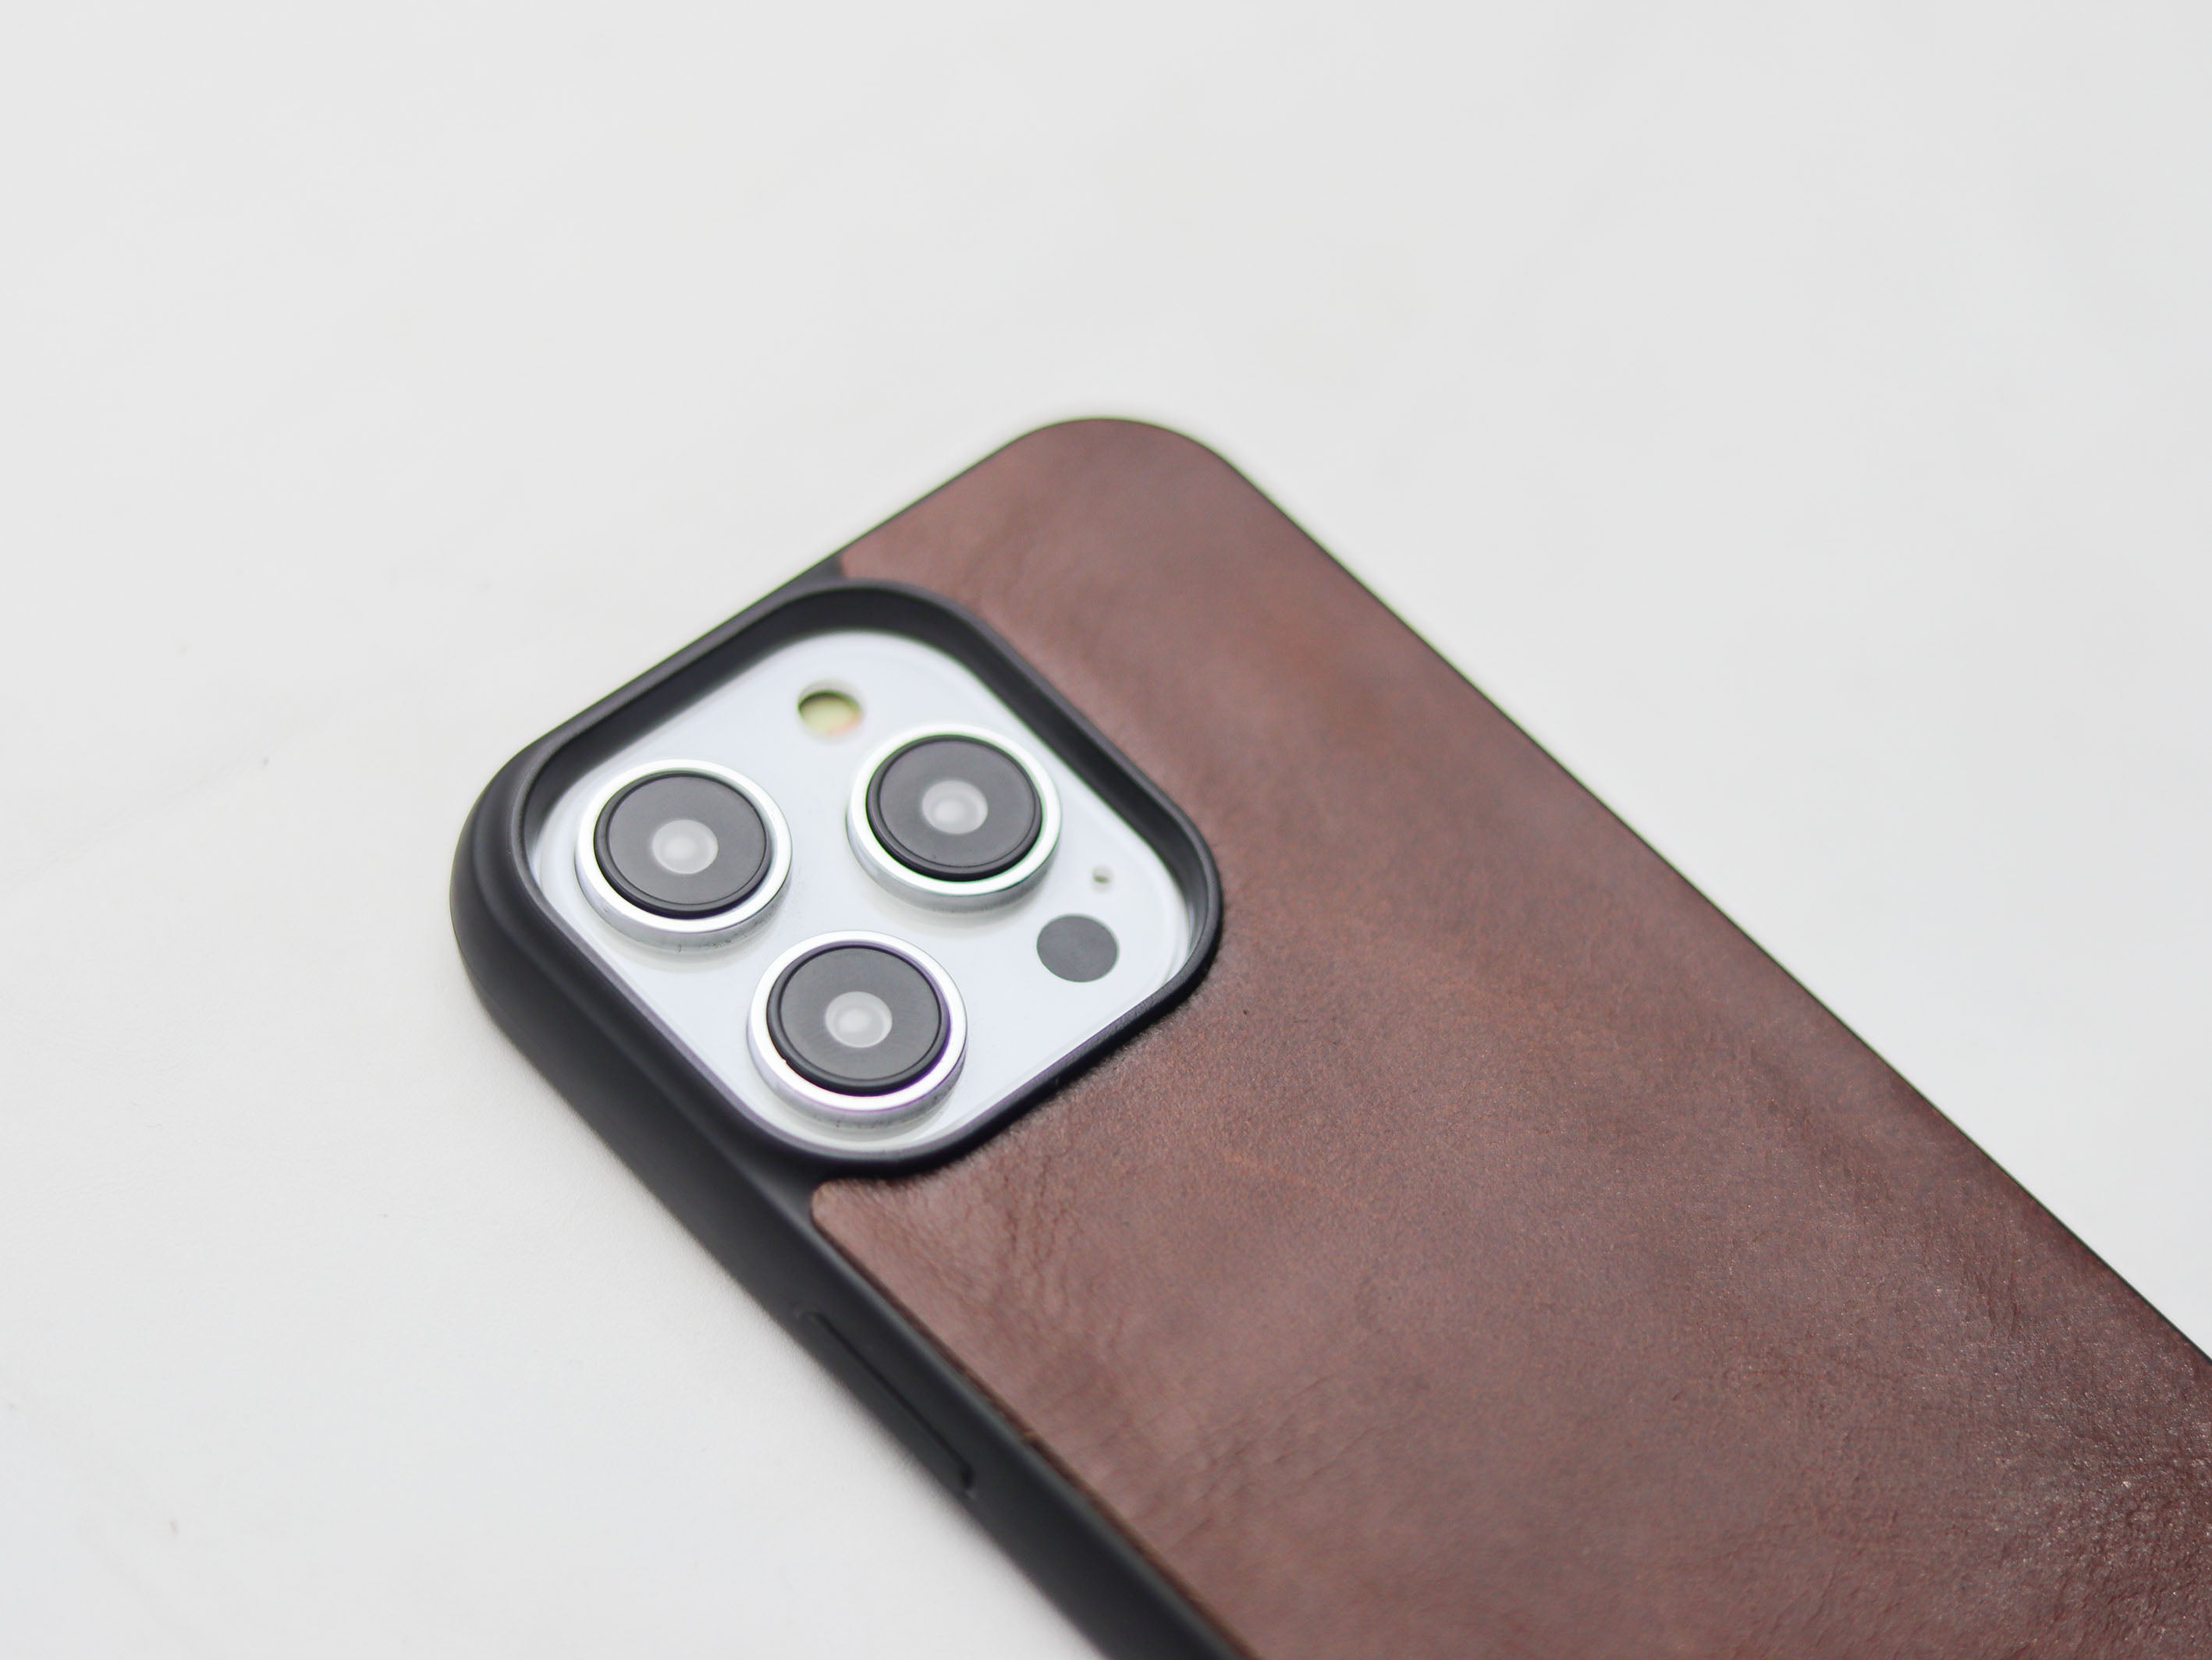 WHISKY BROWN LEATHER - CLASSIC PHONE CASE